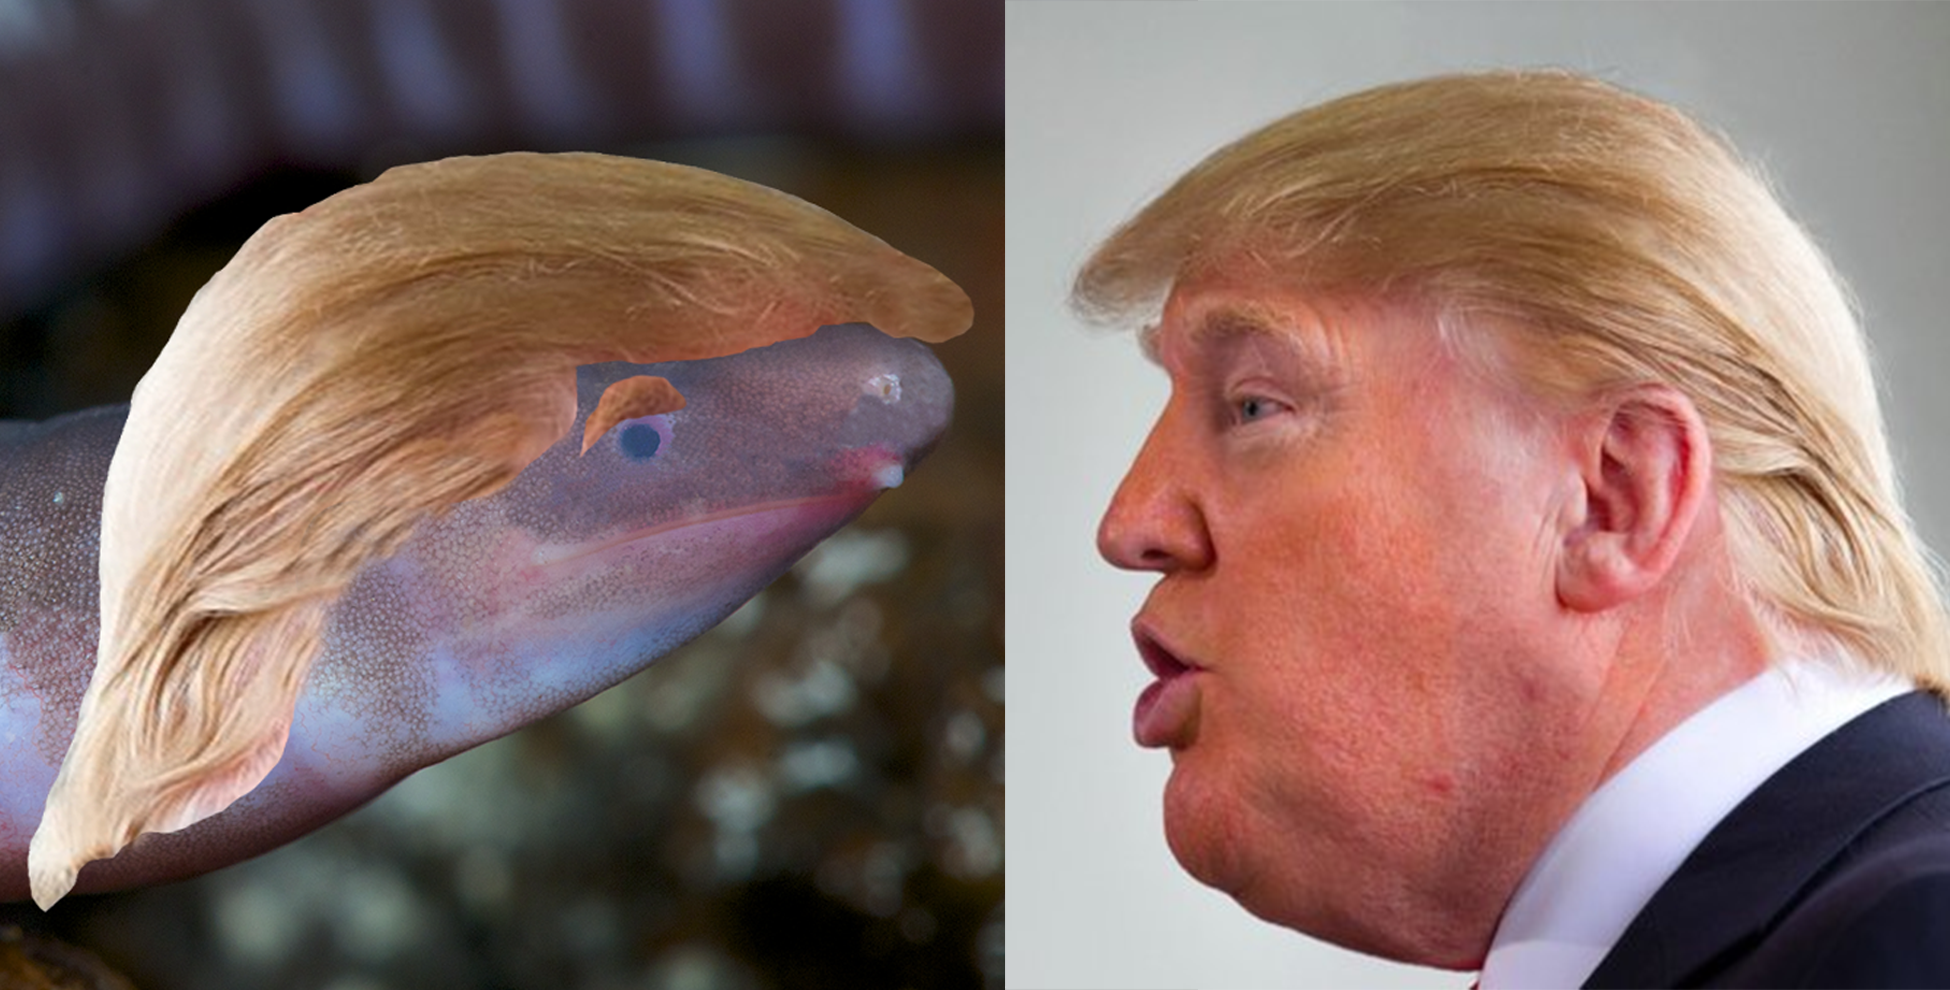 And finally... Building boss names blind amphibian after Donald Trump